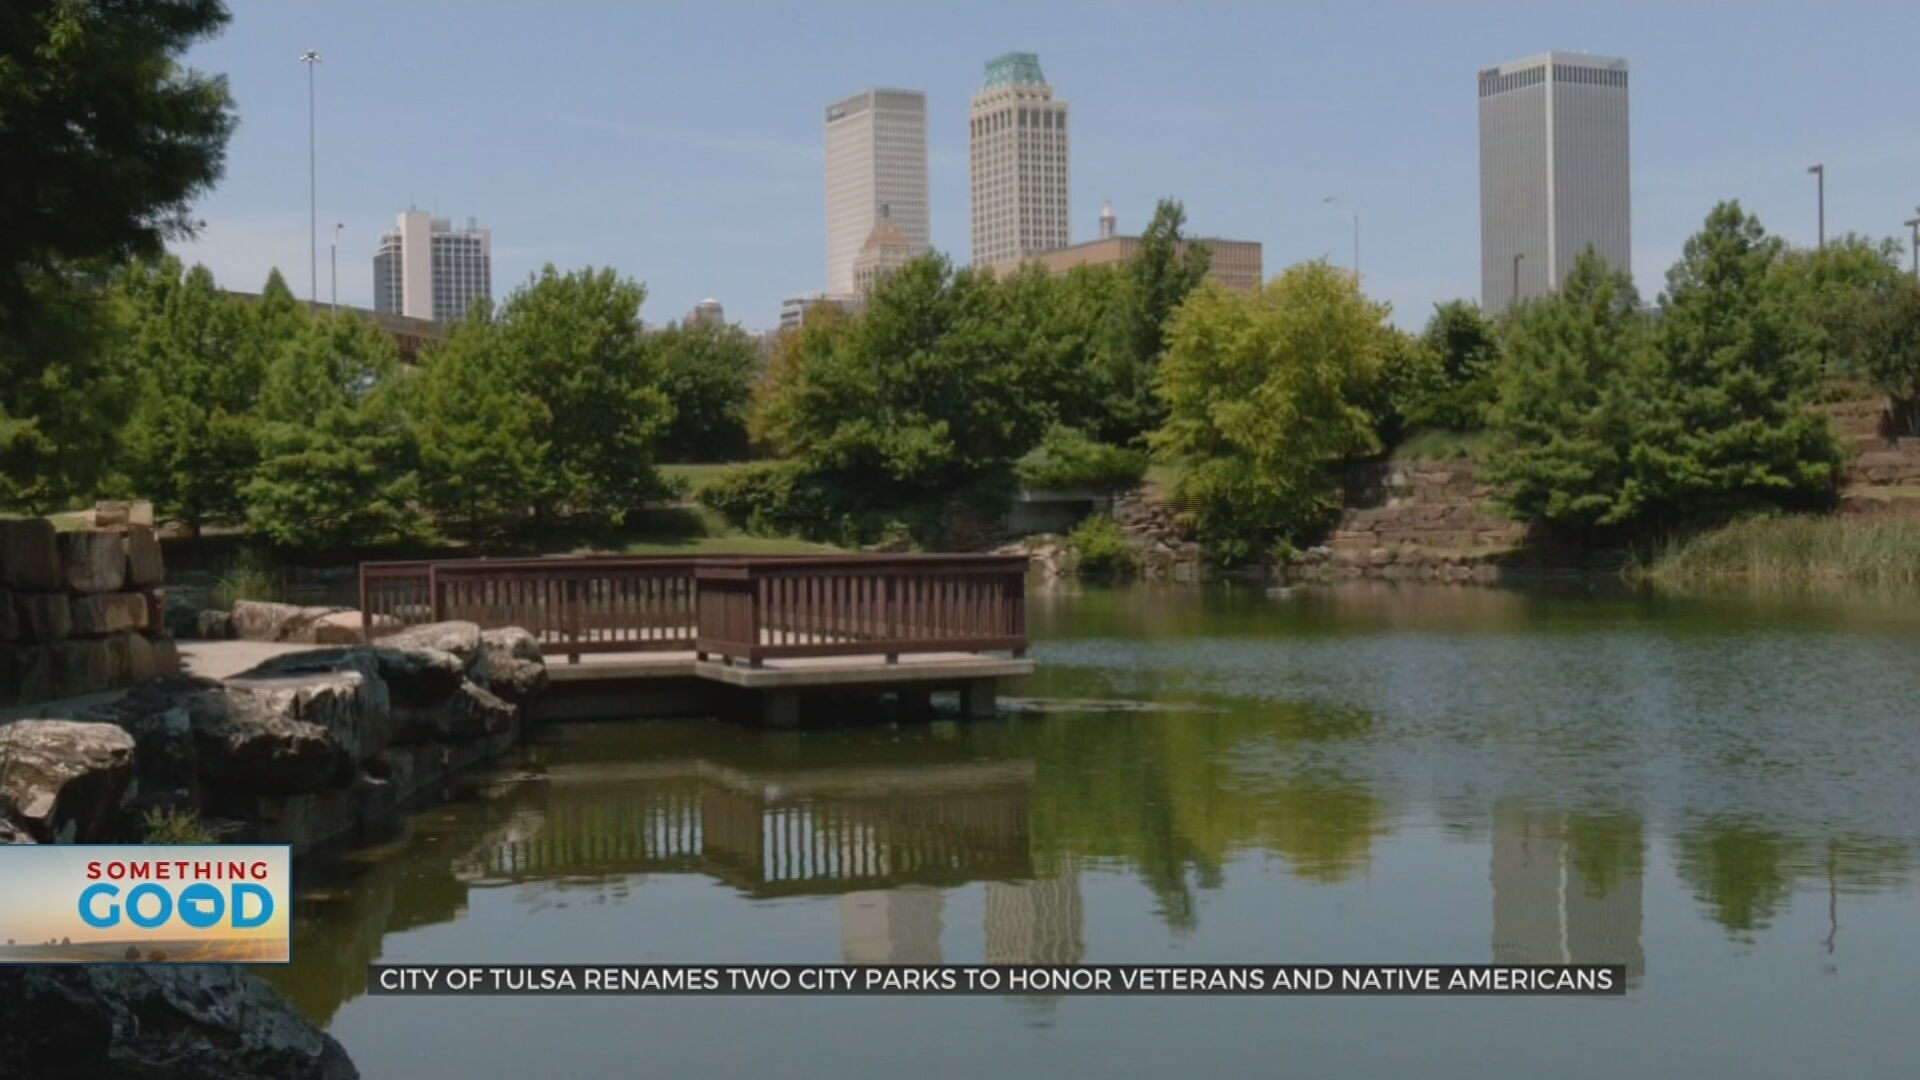 City Of Tulsa To Rename 2 Parks, Acknowledging History Of Native Americans & Veterans 